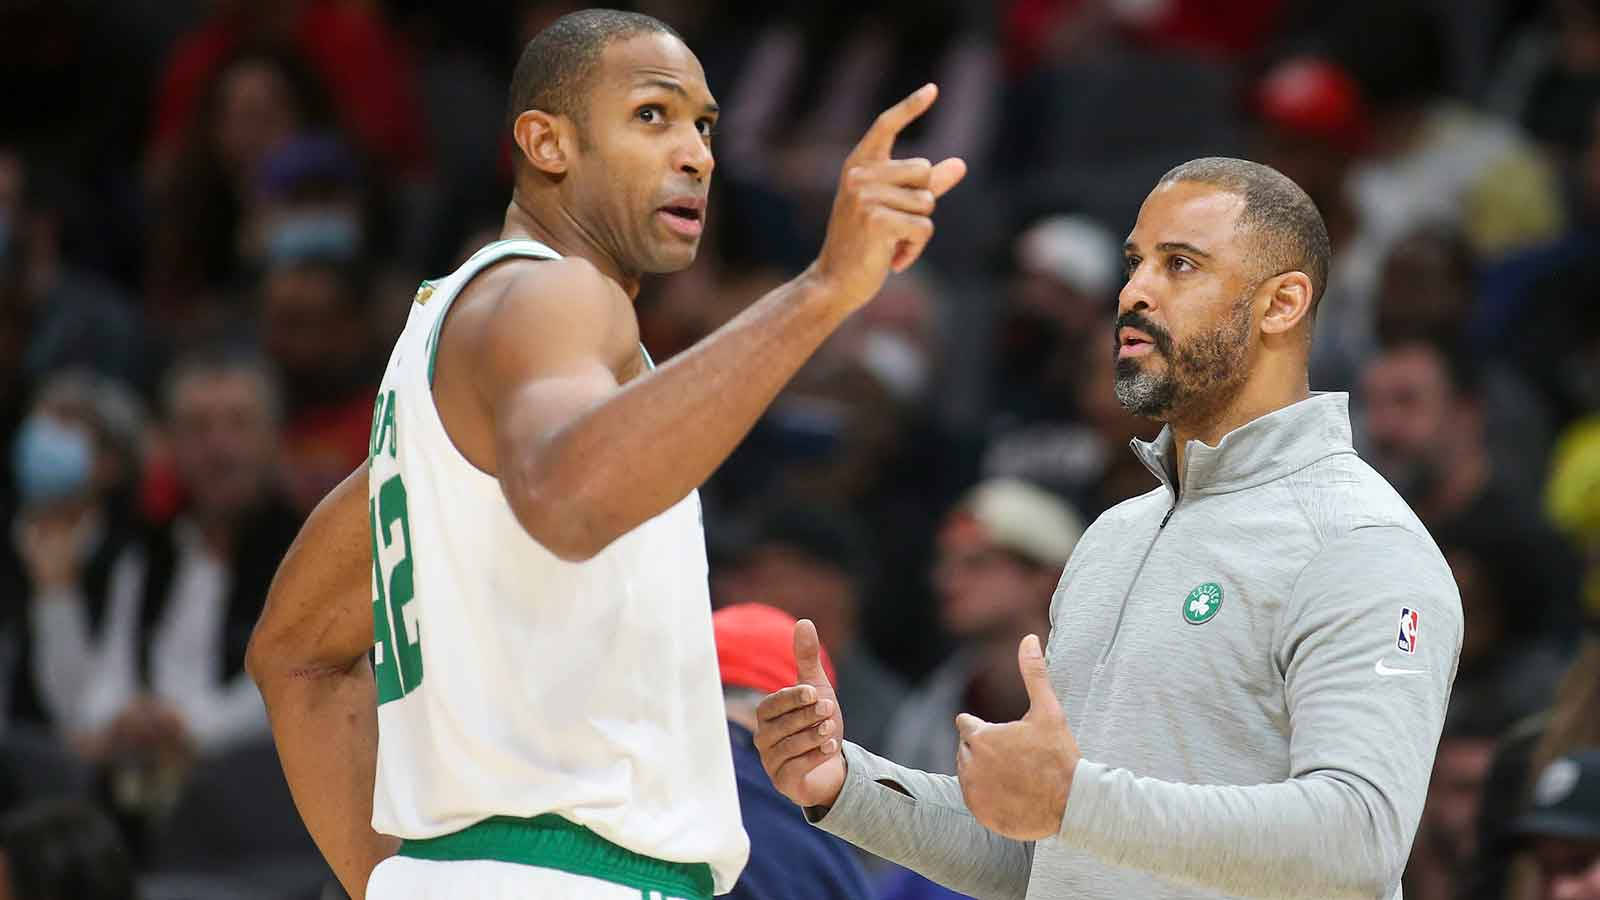 Al Horford Talks With His Coach Wallpaper